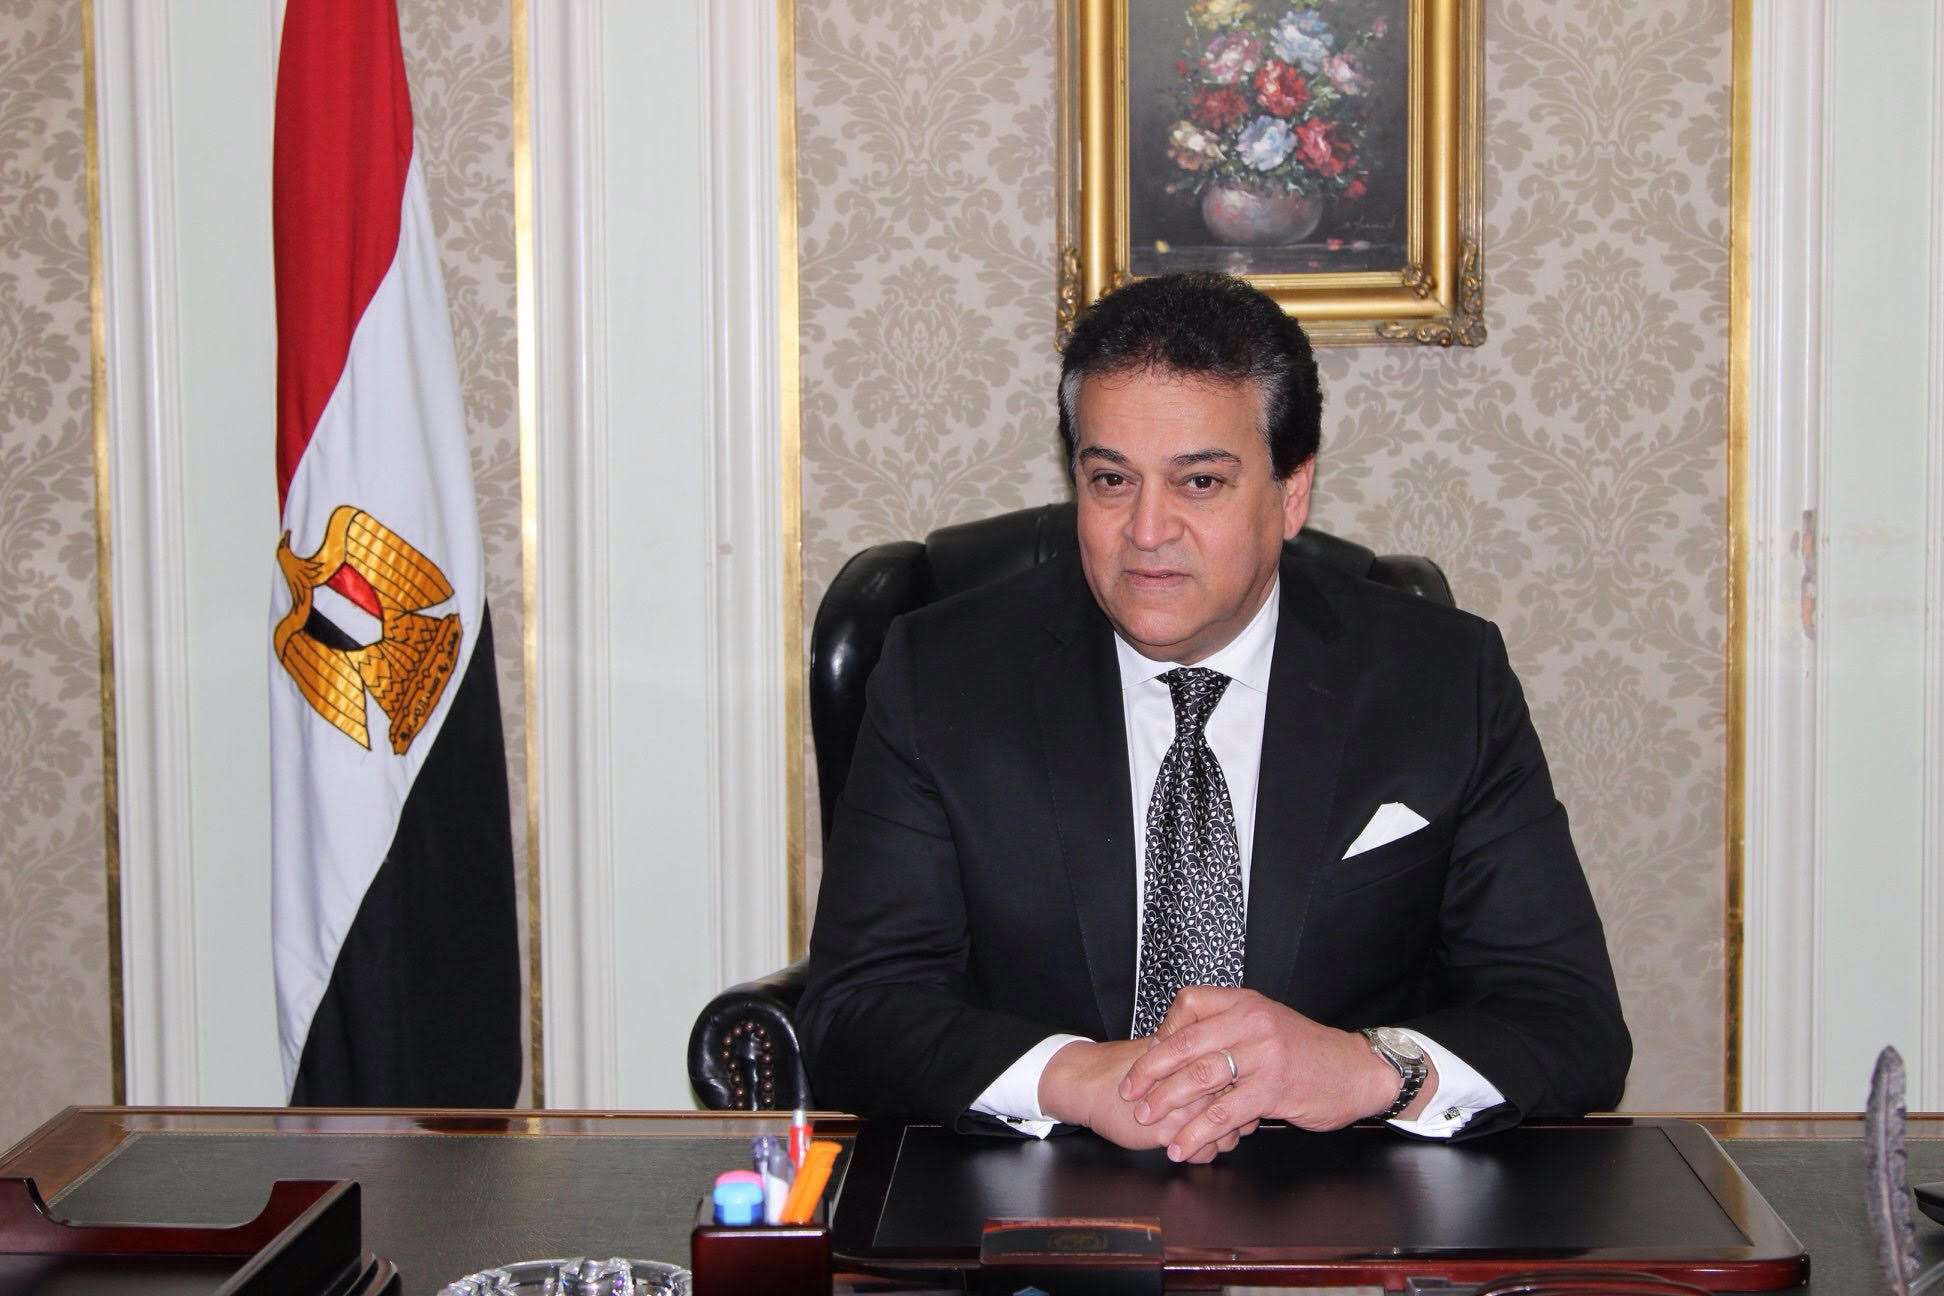 Dr. Khaled Abdel Ghaffar, Minister of Higher Education and Scientific Research announced the issuance of two presidential decrees